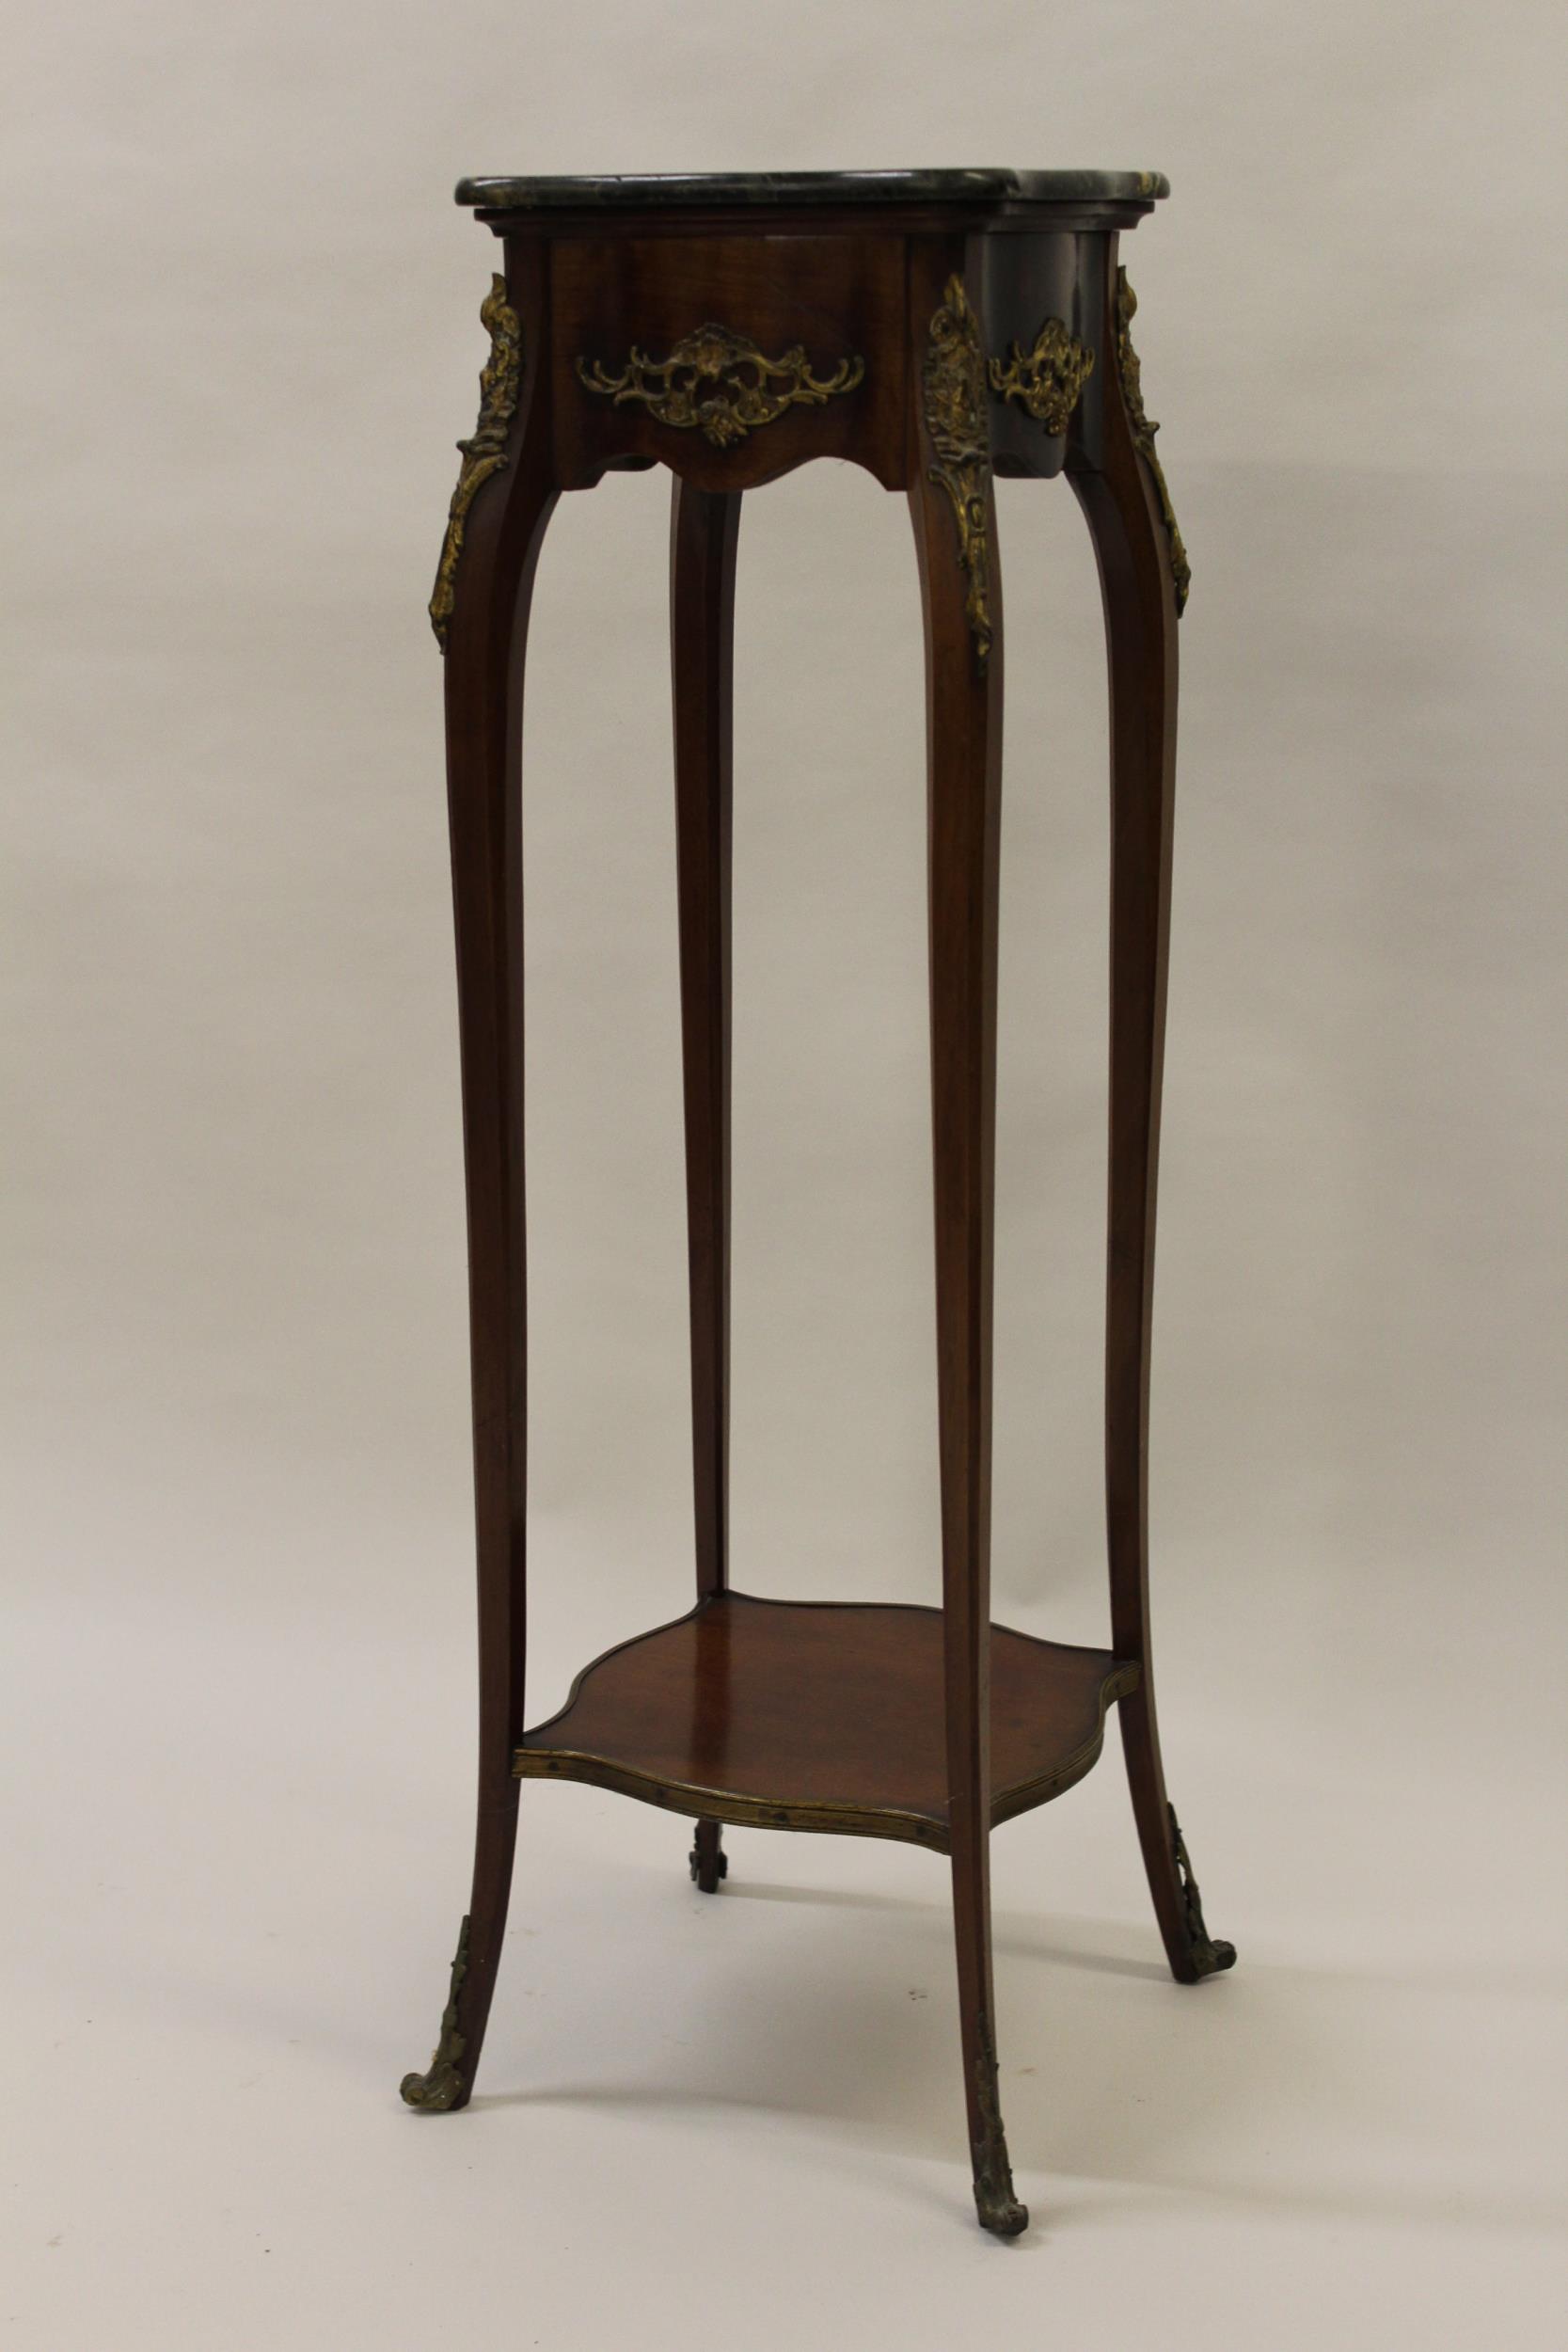 Late 19th / early 20th Century French ormolu mounted jardiniere stand with marble top, 41.5ins - Image 2 of 2